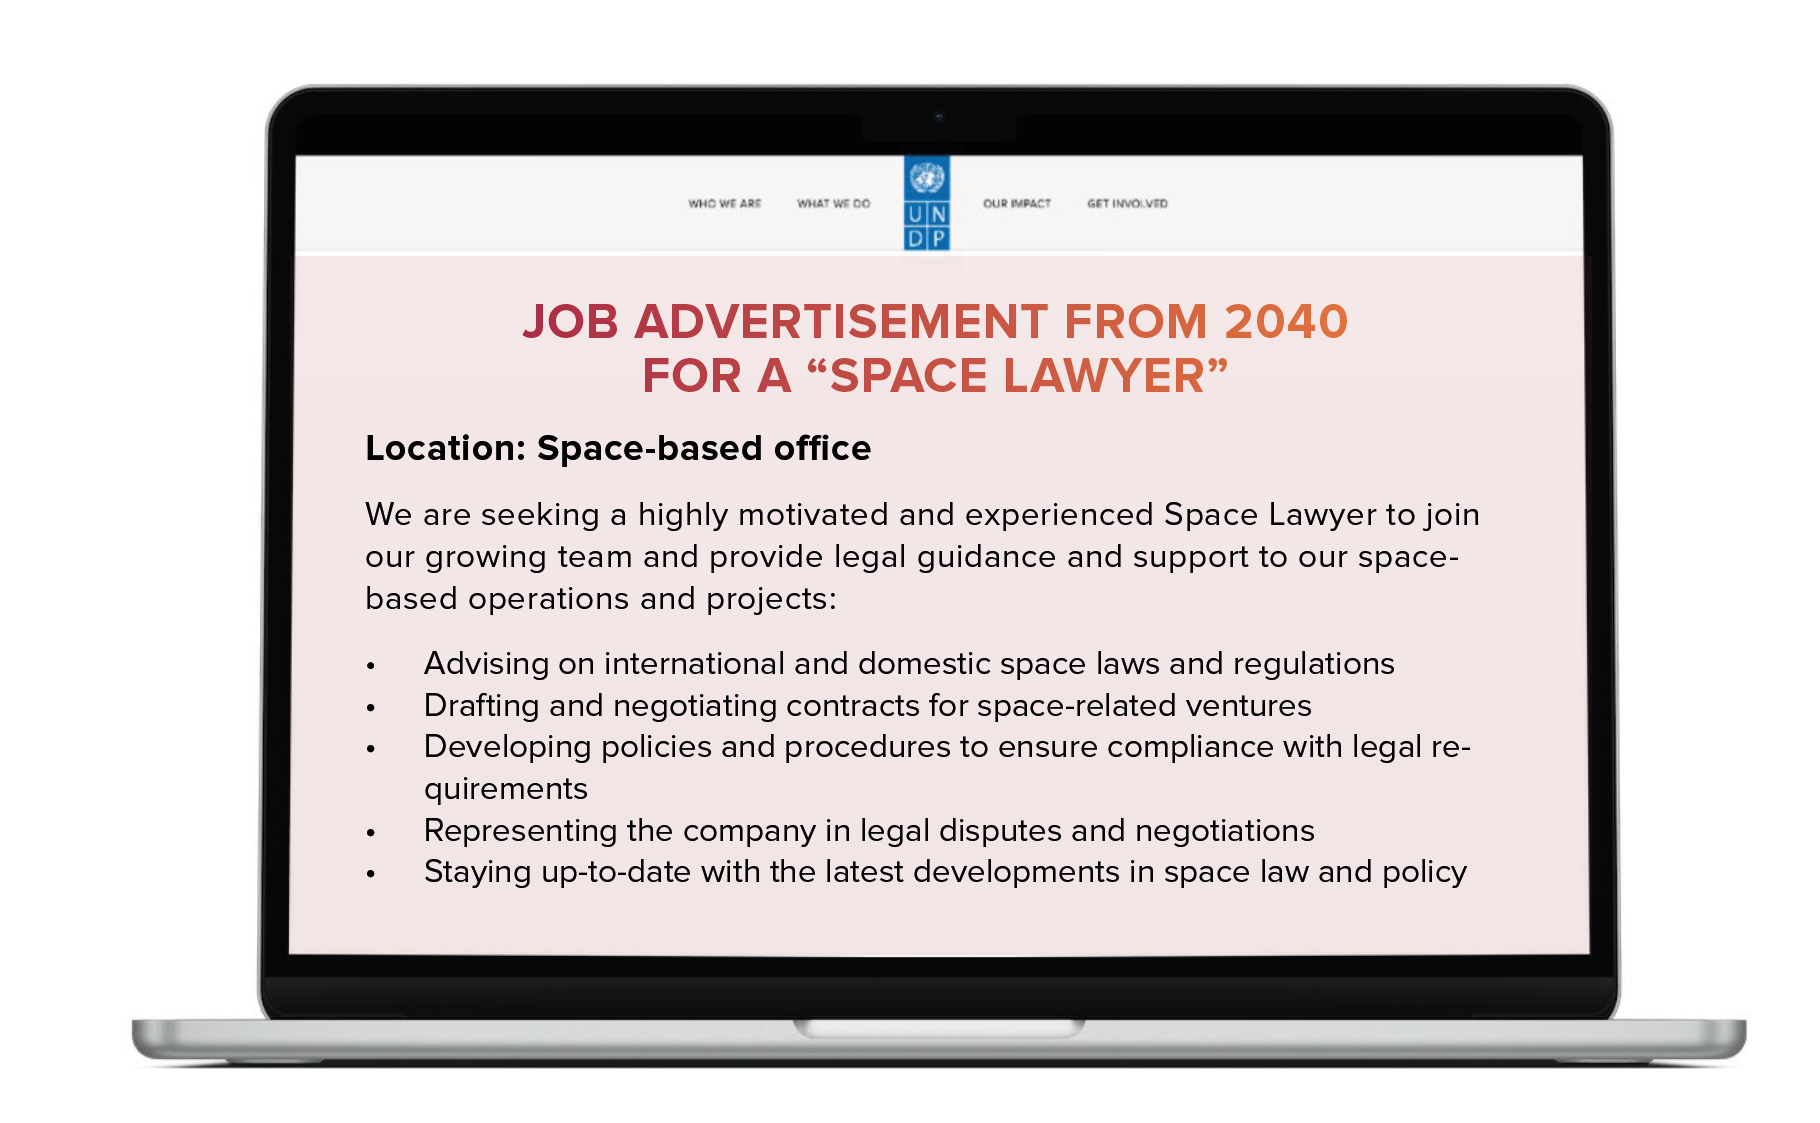 Job advertisement from 2040 for a “space lawyer”. Location: Space-based office We are seeking a highly motivated and experienced Space Lawyer to join our growing team and provide legal guidance and support to our space-based operations and projects.